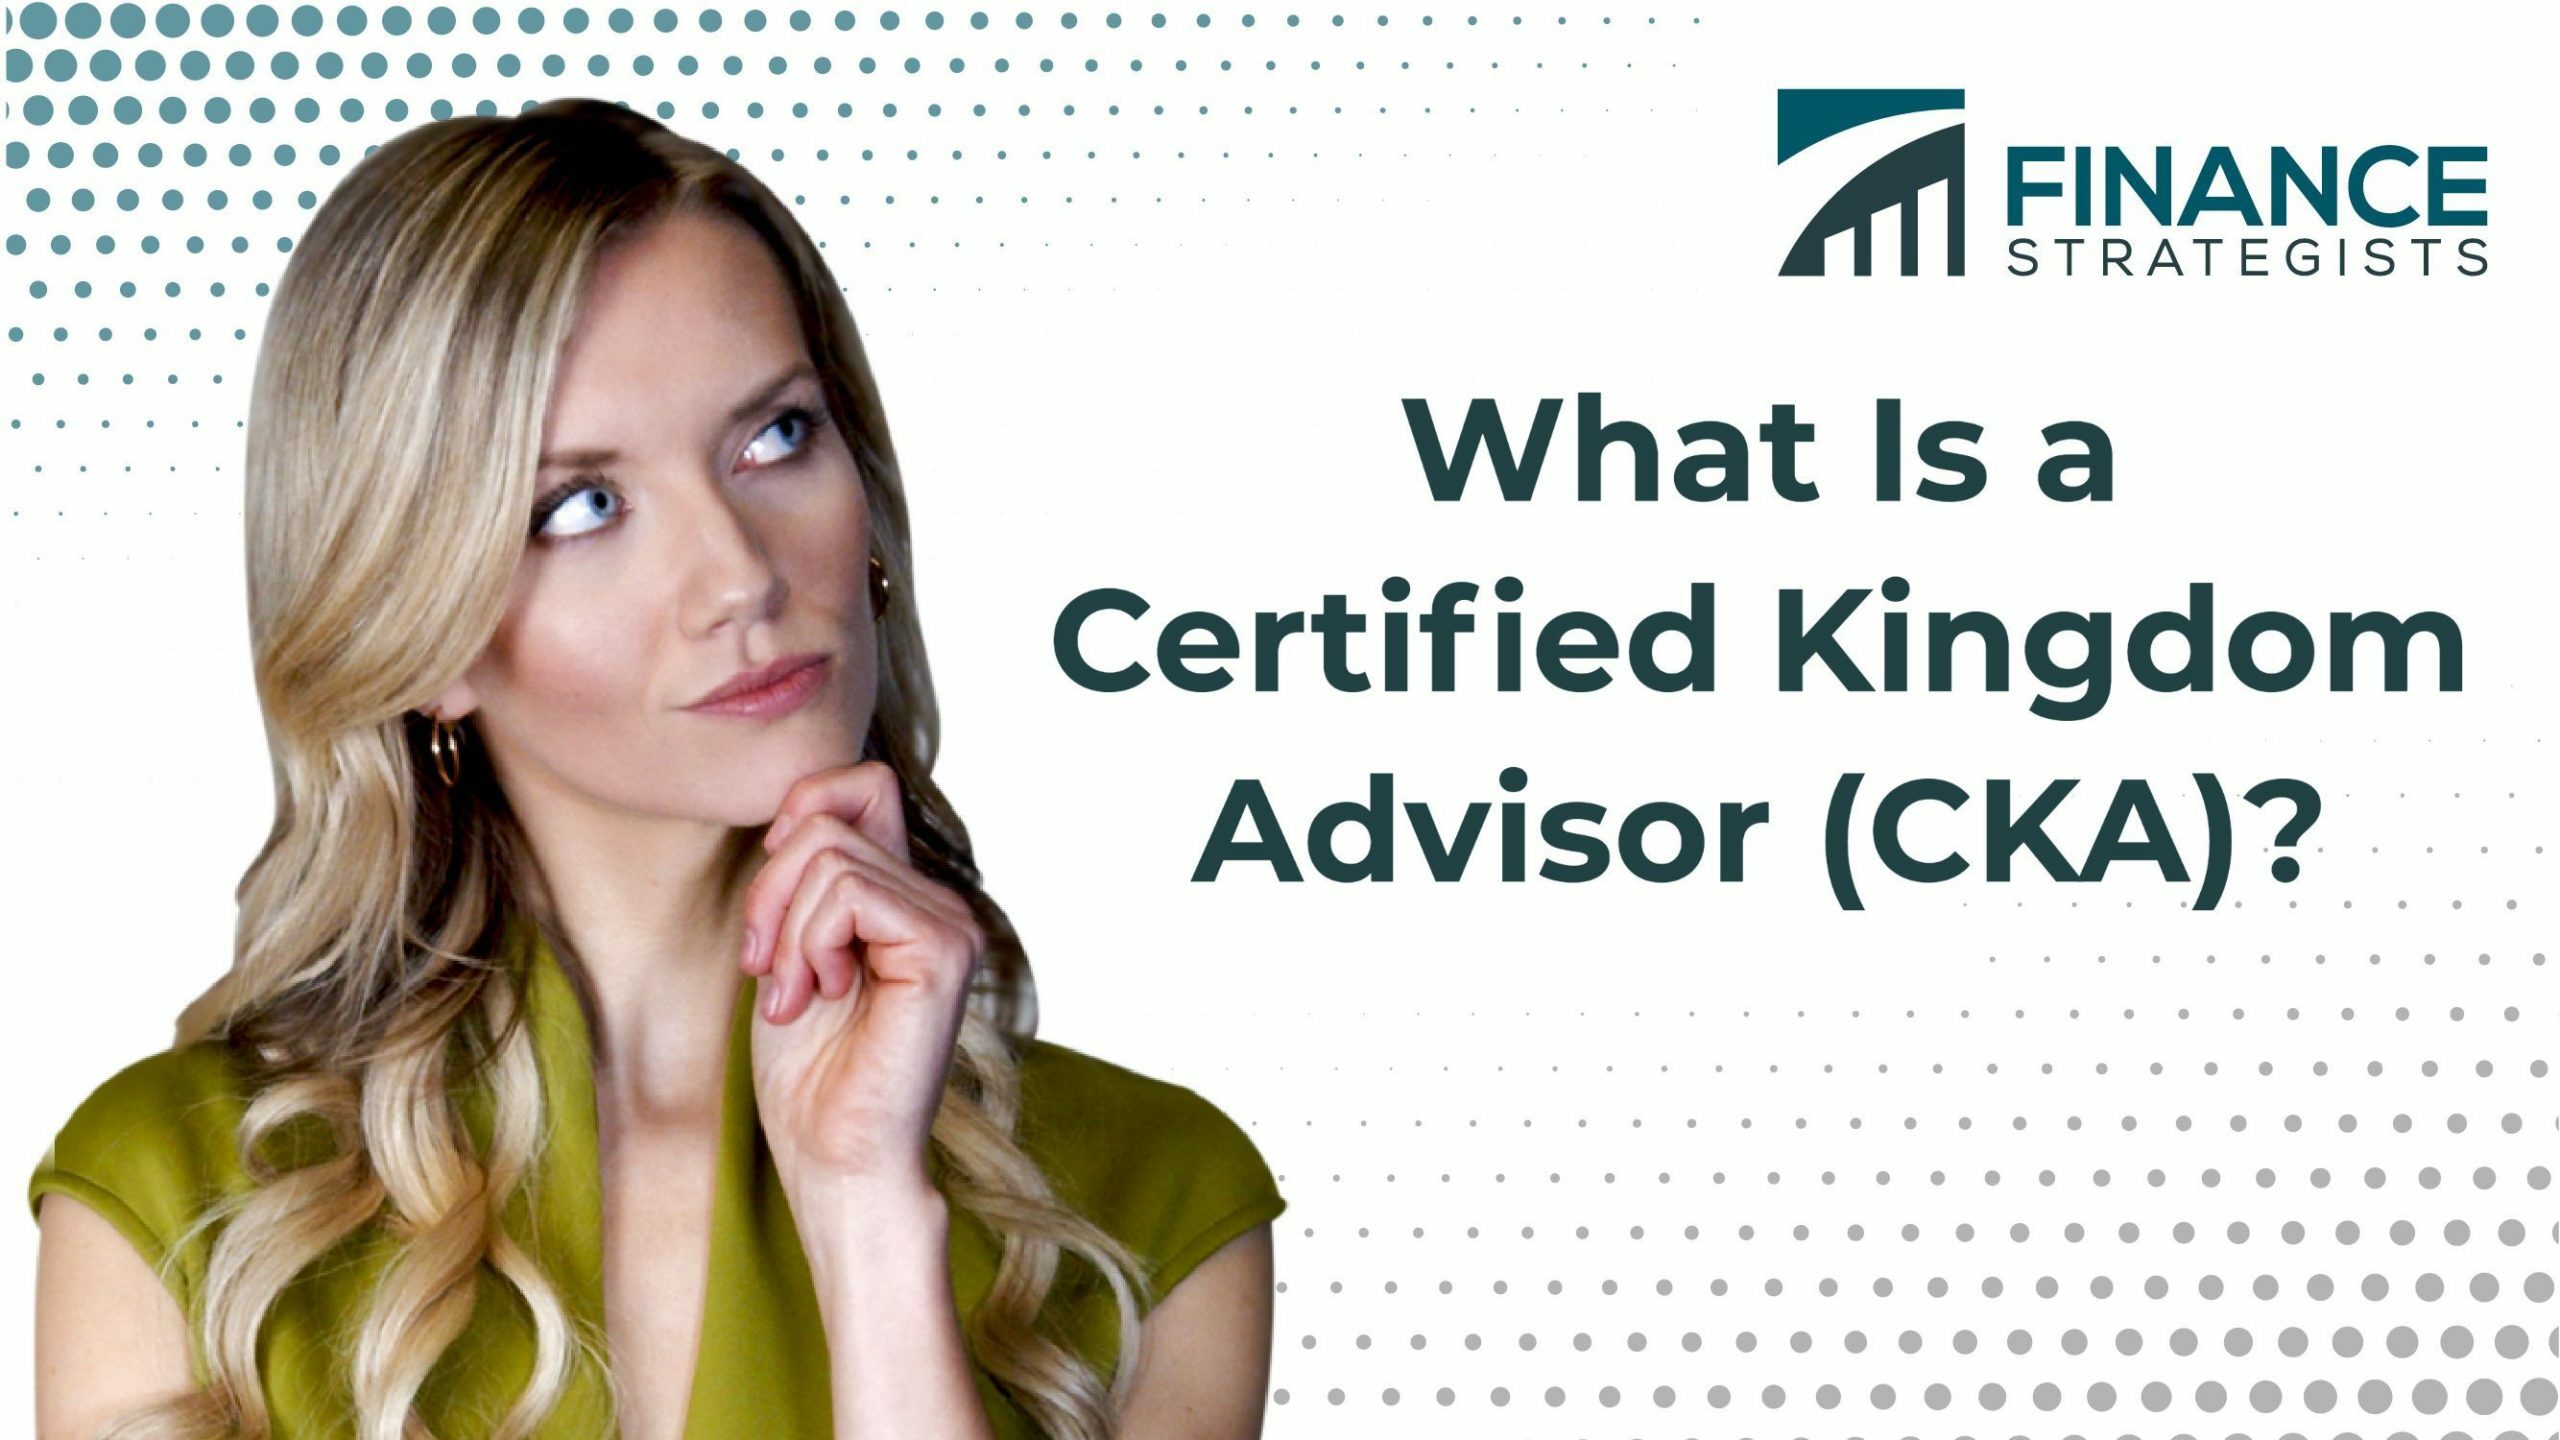 Certified Kingdom Advisor (CKA) Definition & How to Find One